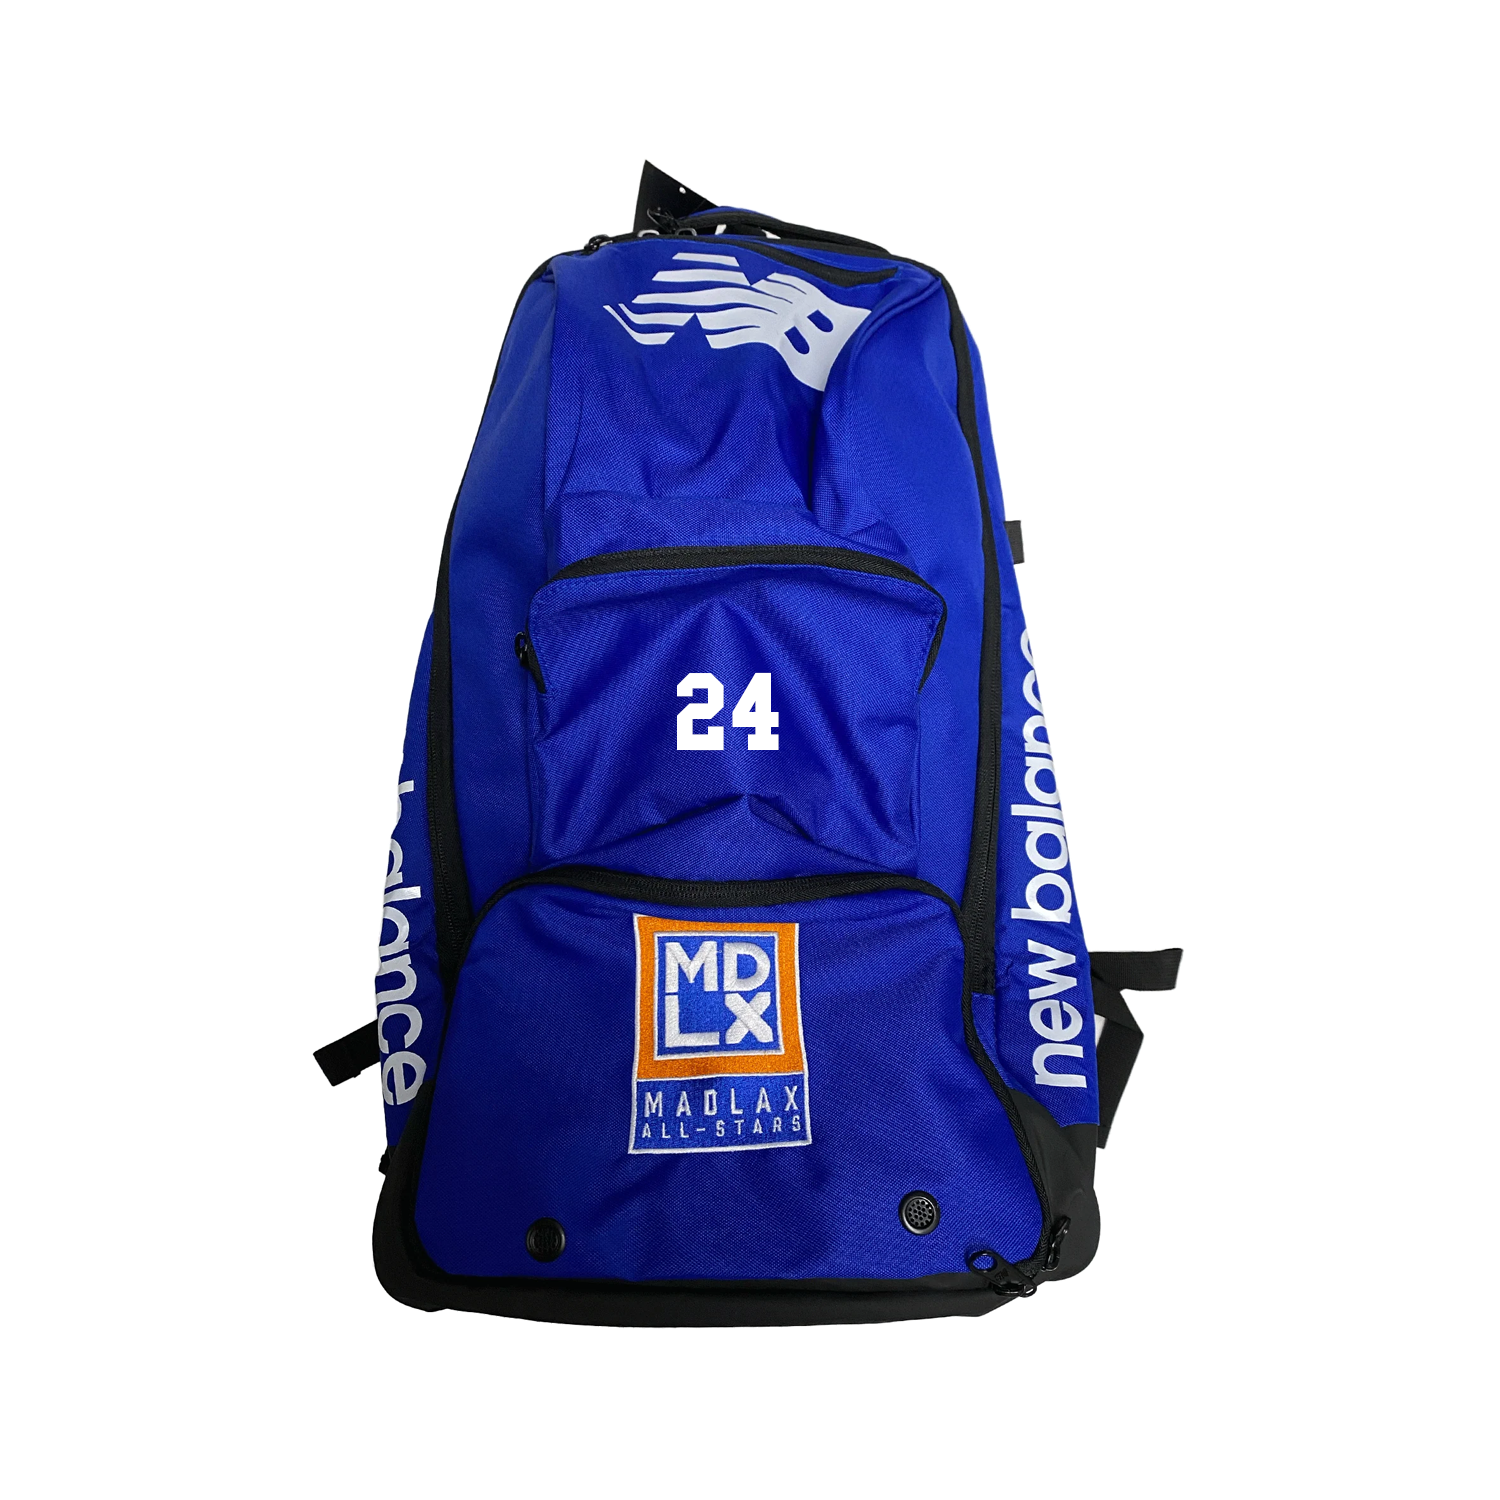 Team Field Backpack by New Balance